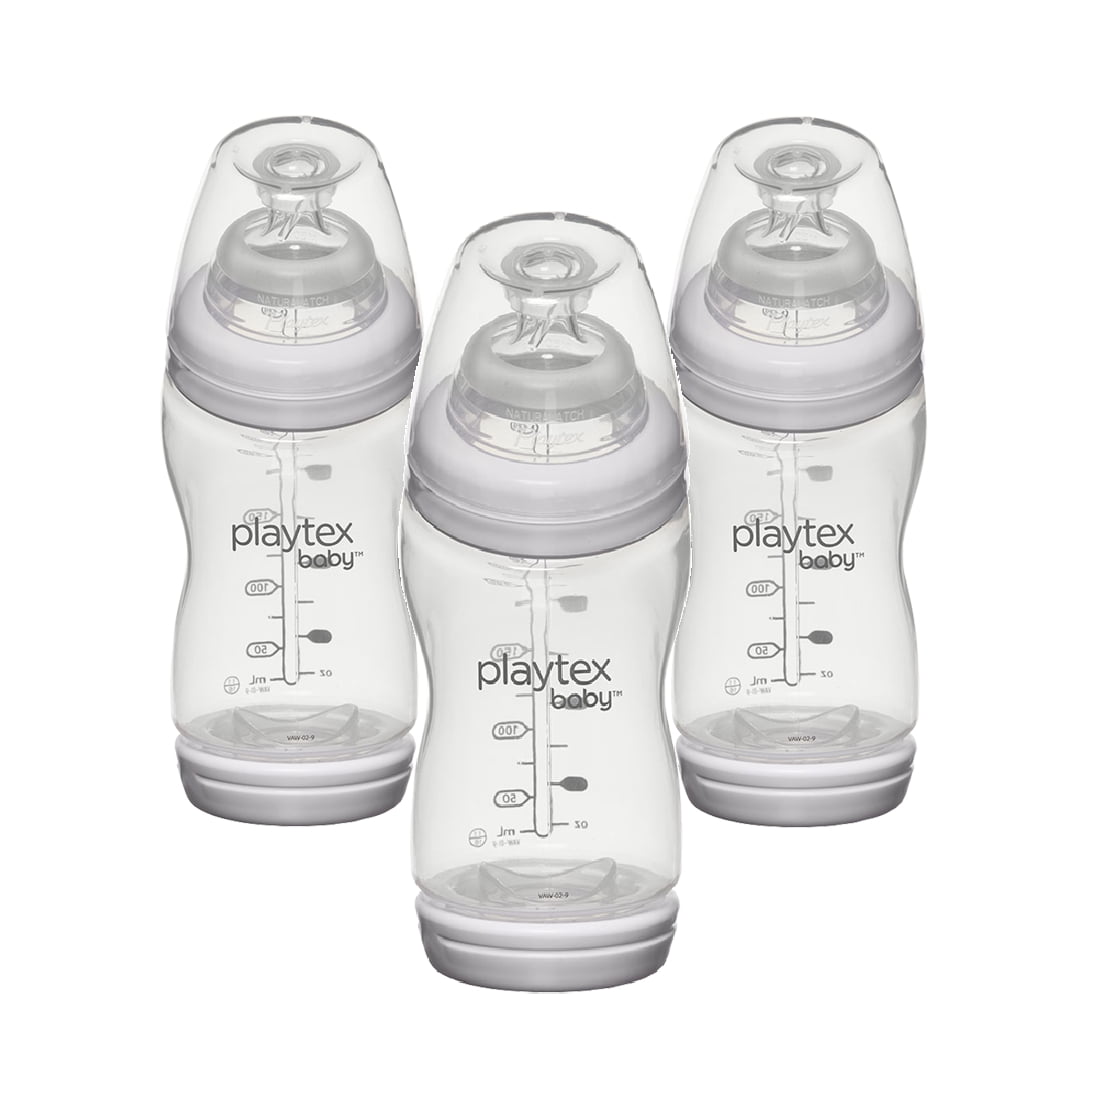 Playtex VentAire Bottle 9oz – Doctor Recommended Features for